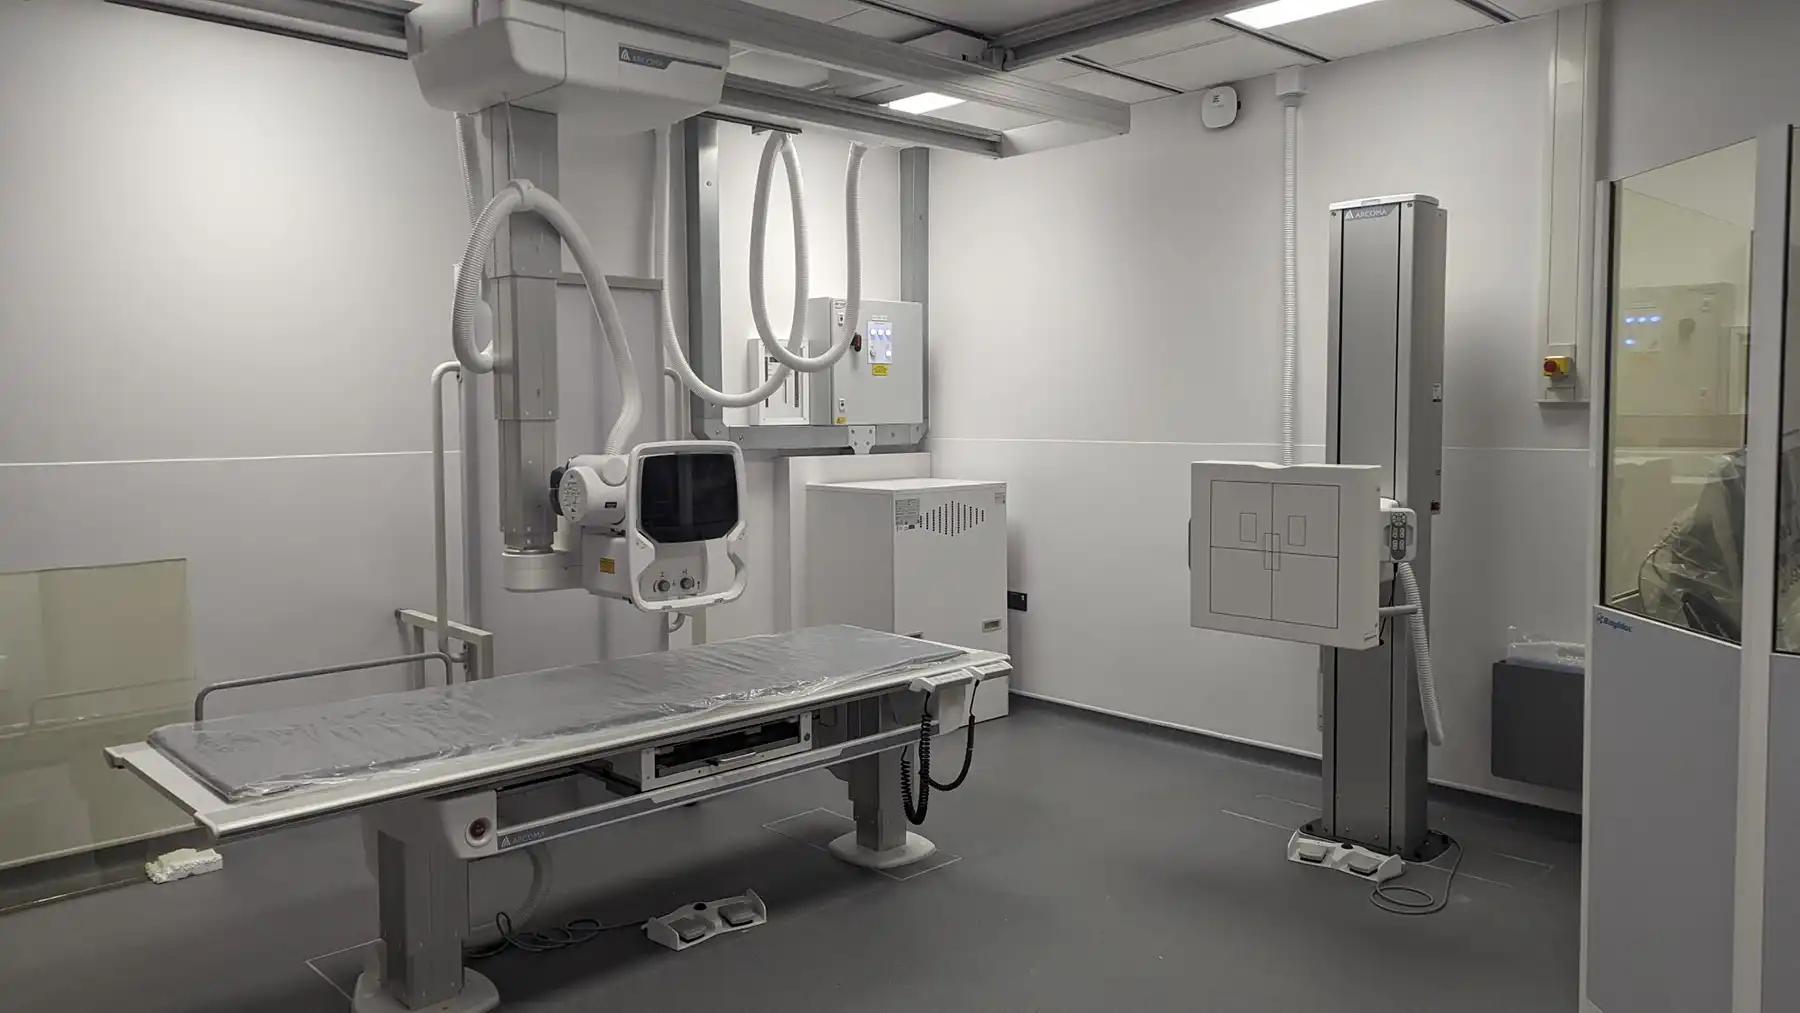 X-rays and more can be offered at the refurbished site